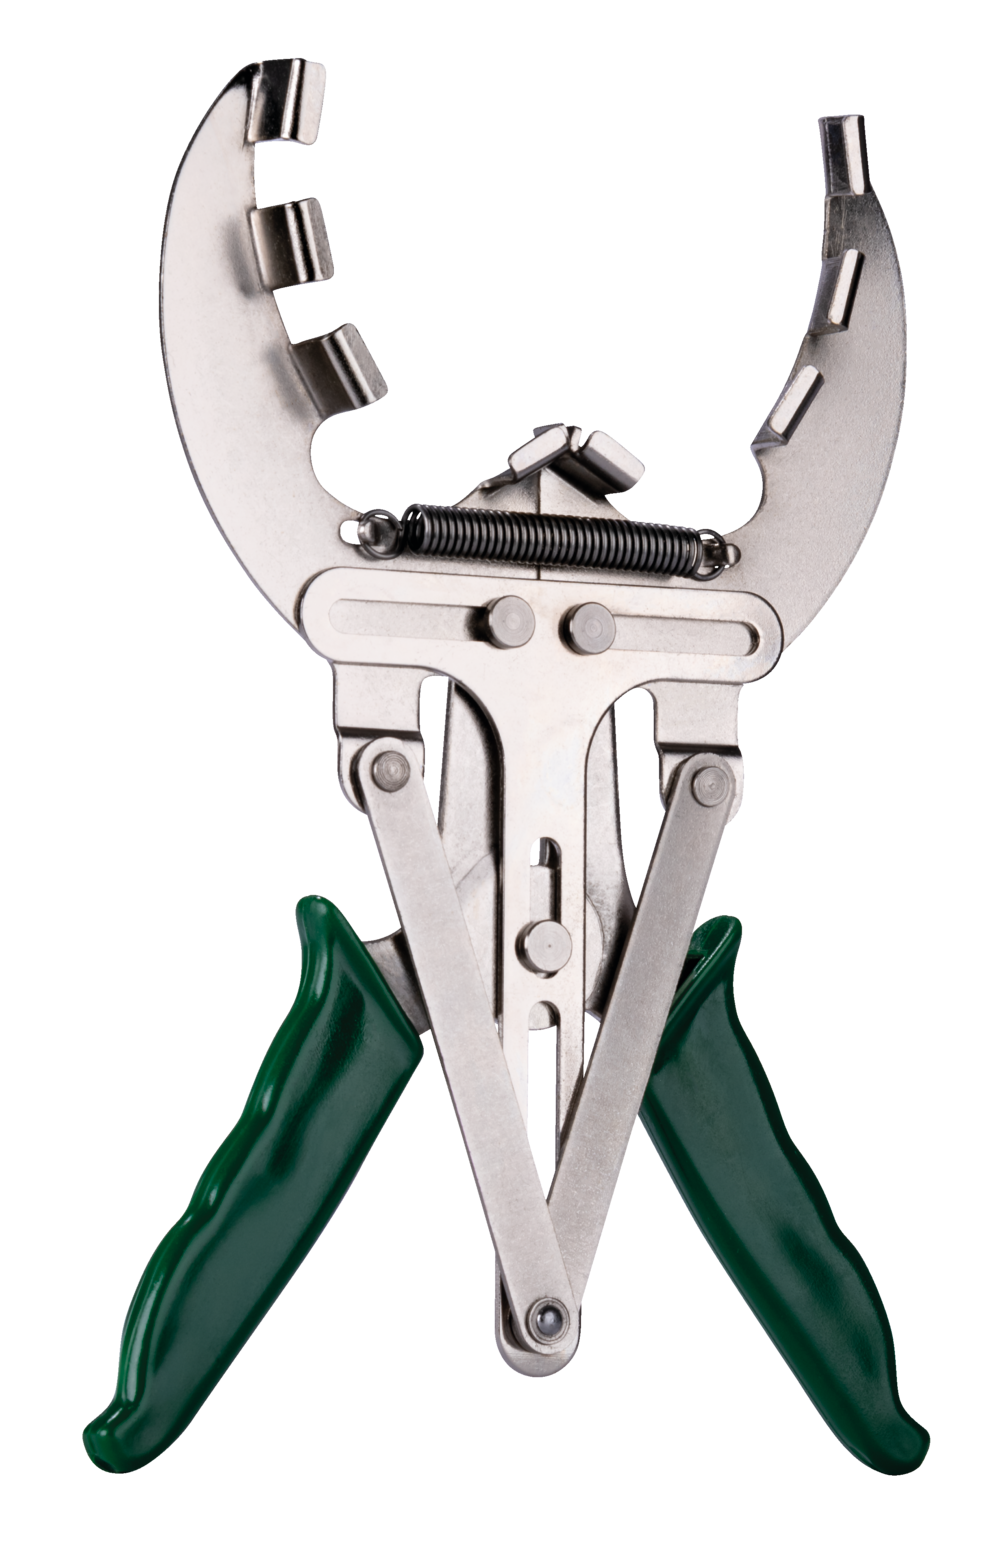 The piston ring pliers 101-1 for expanding piston rings without destroying the mould